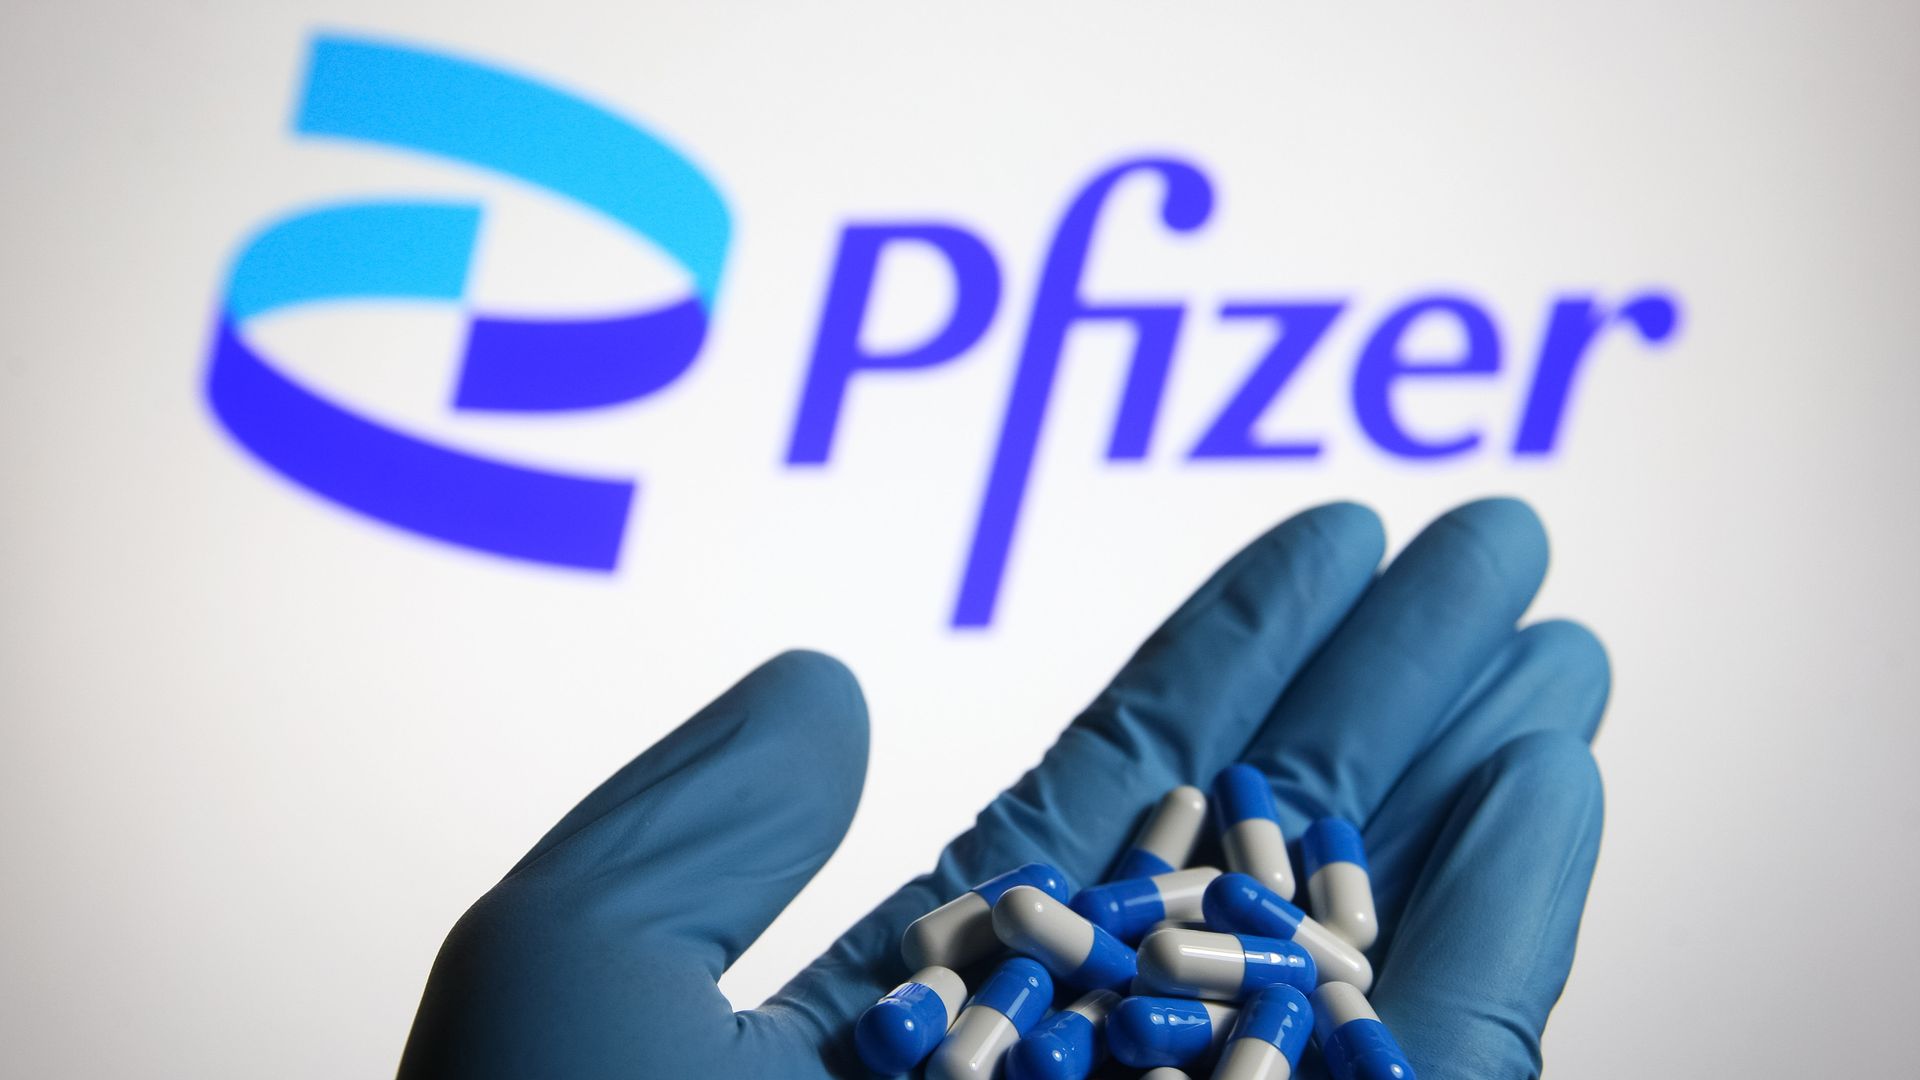 The blue Pfizer logo in the background, and a glove holding blue and white pills in the foreground.